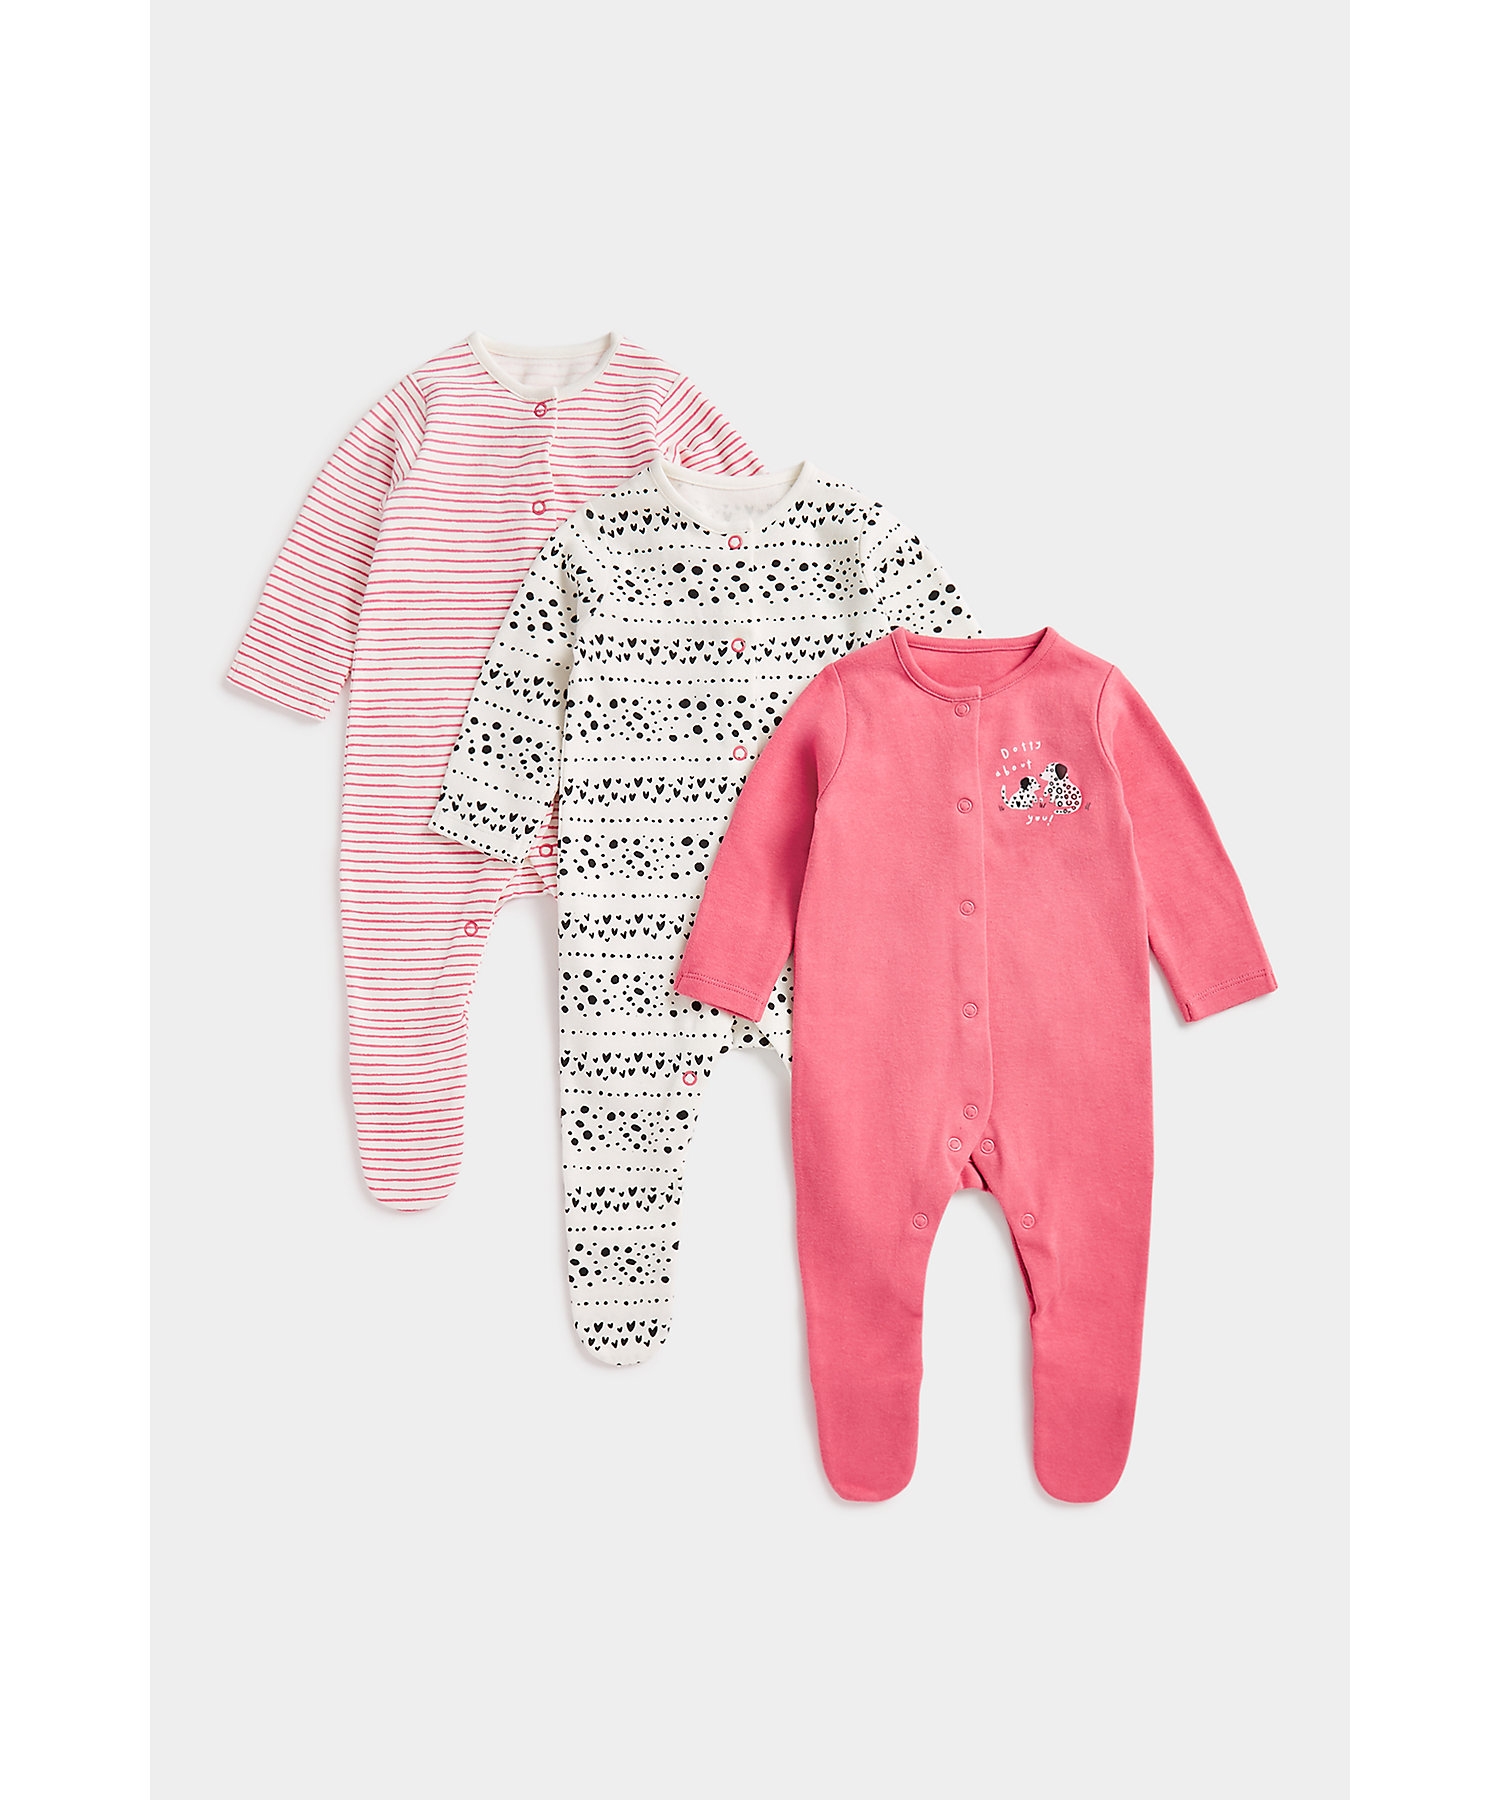 Girls Full Sleeves Sleepsuits Front Open -Multicolor